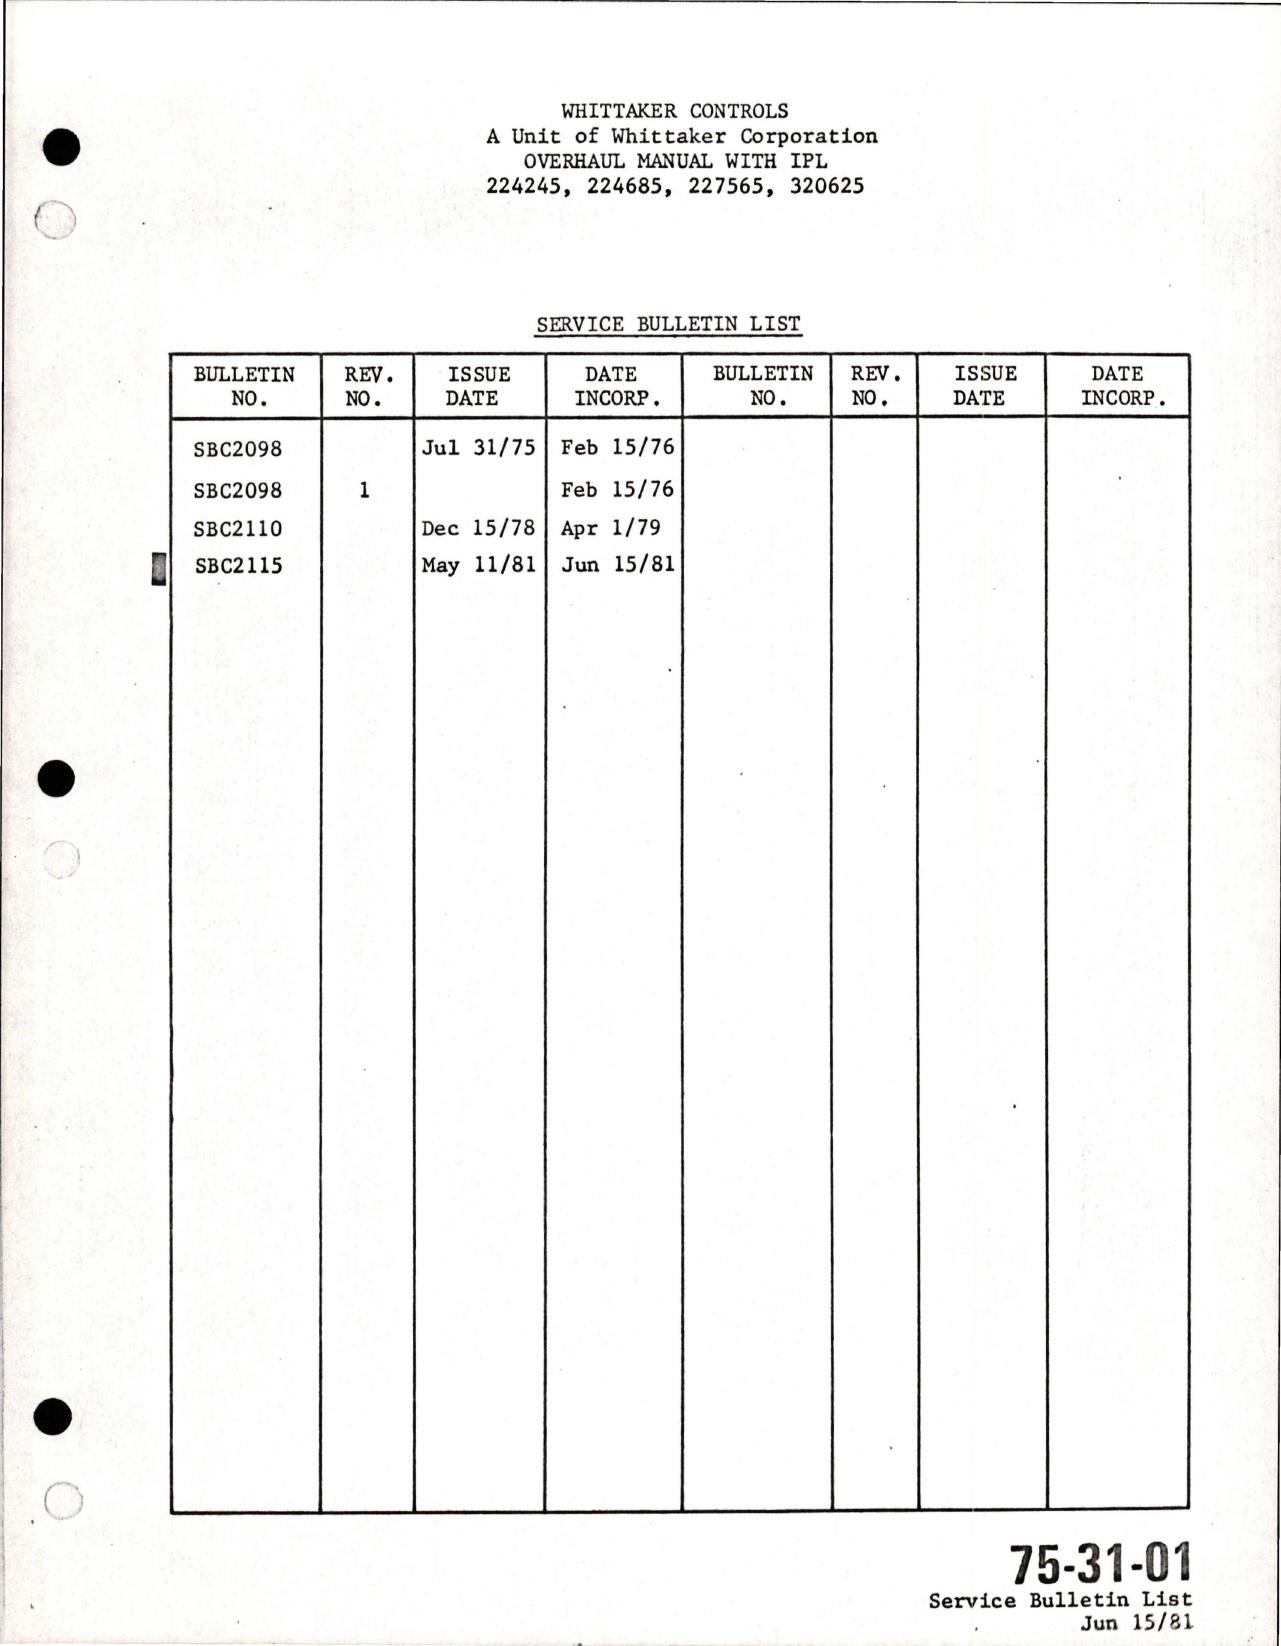 Sample page 5 from AirCorps Library document: Overhaul with Illustrated Parts List for Pressure Relief Valve - 6 inch tube size - Revision 7